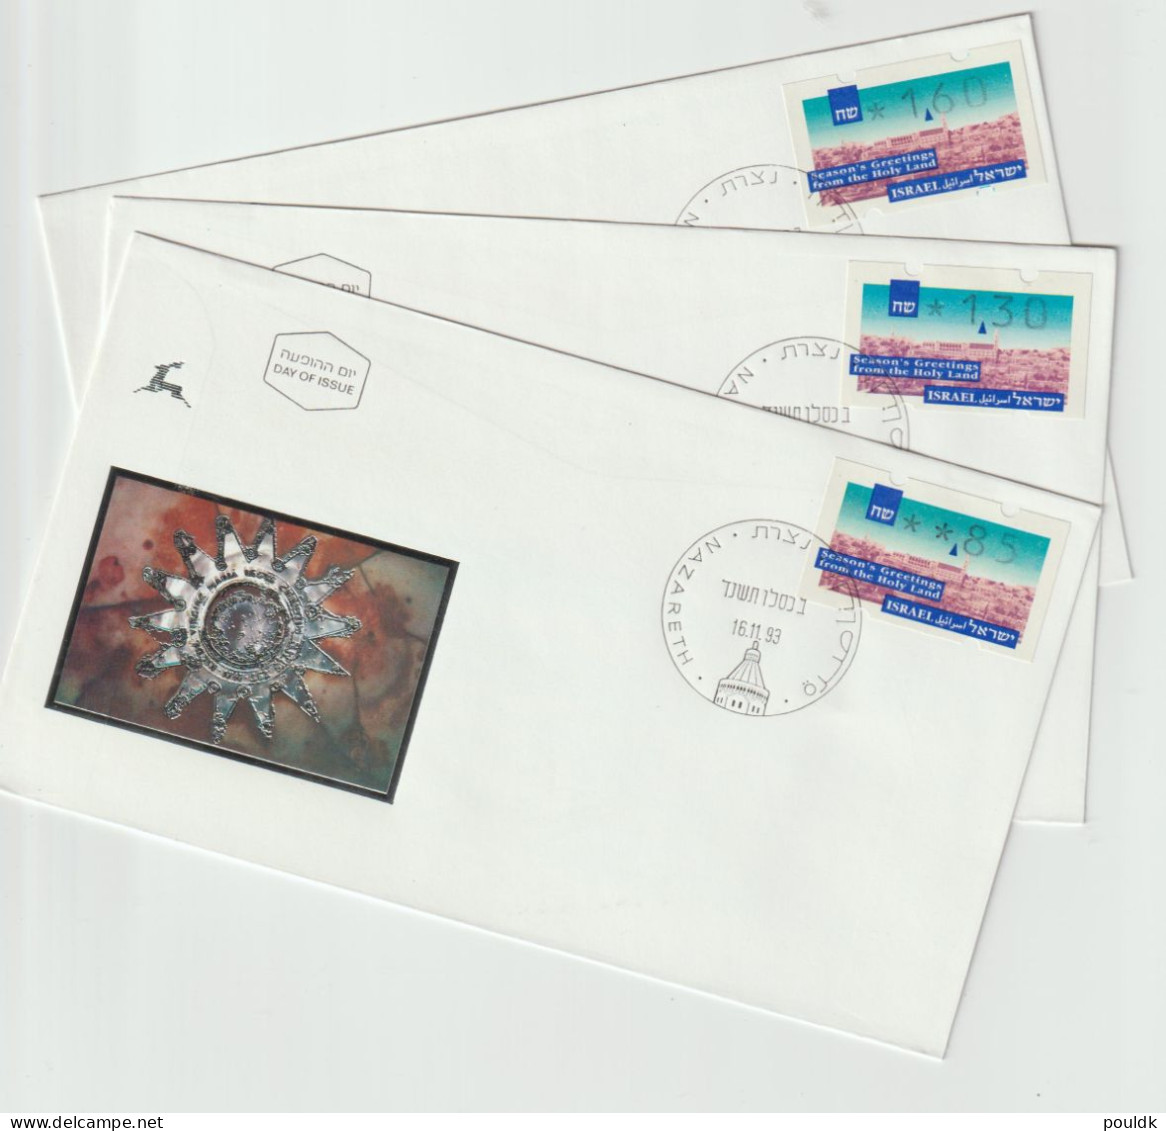 Israel 1993 ATM Christmas - Three FDC From Nazareth. Postal Weight 0,04 Kg. Please Read Sales Conditions Under Image Of - Timbres De Distributeurs [ATM]